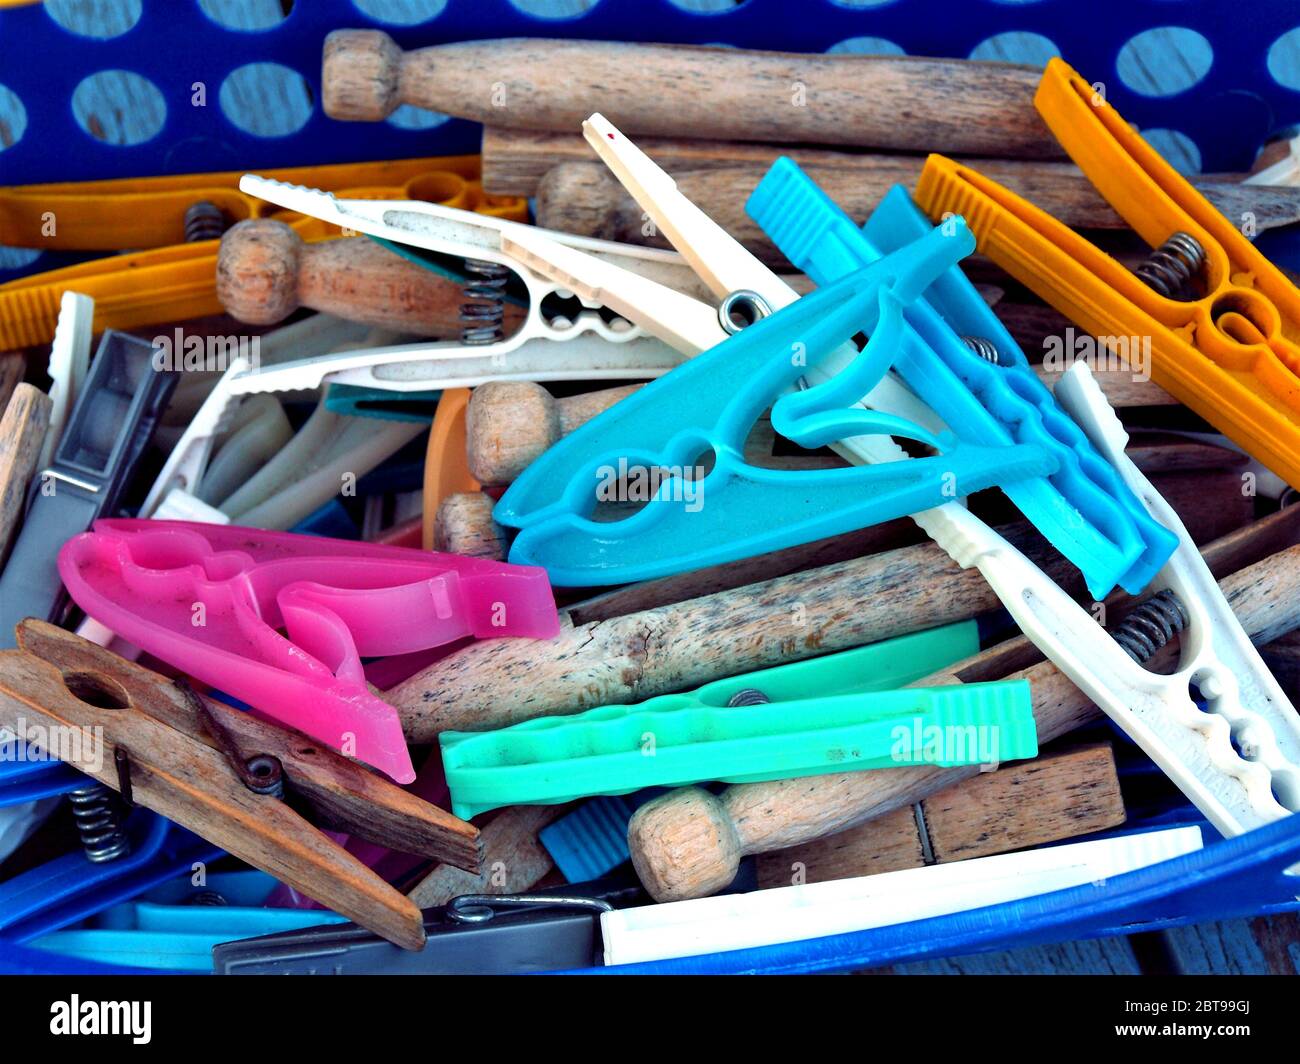 Sutton in Ashfield, Nottinghamshire, UK. July 23, 2010. Variety of plastic  and wooden clothes pegs in the peg basket ready to peg washing to dry at Su  Stock Photo - Alamy